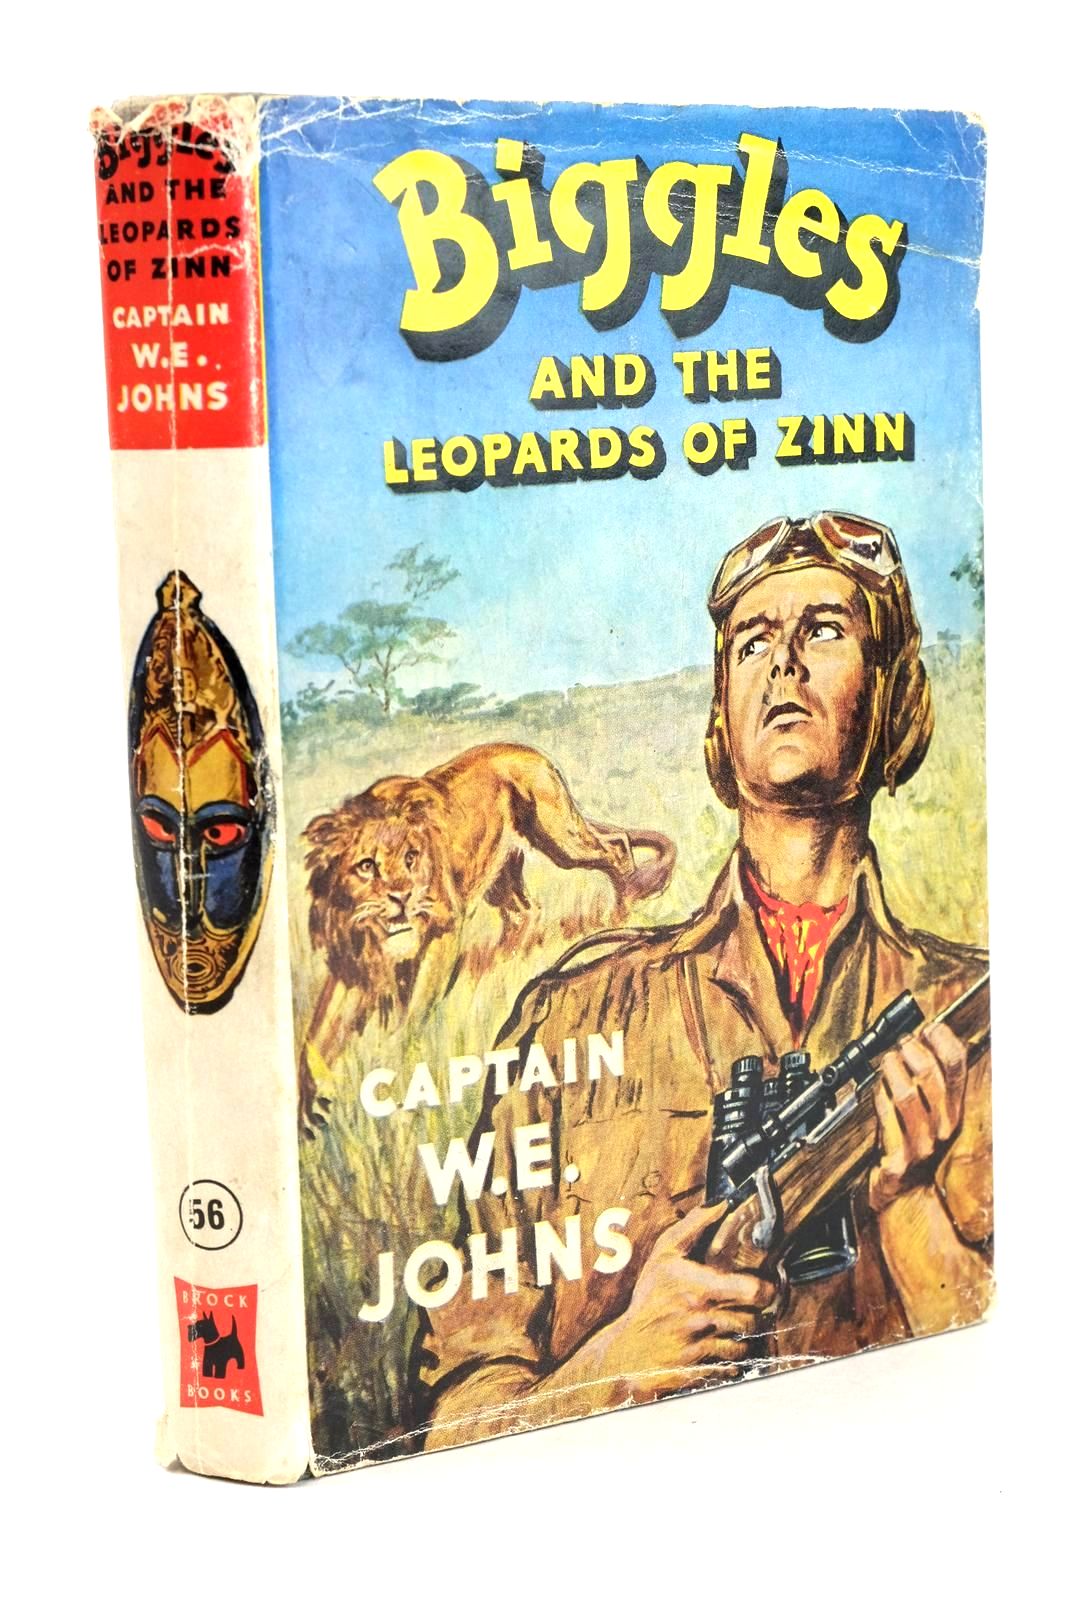 Photo of BIGGLES AND THE LEOPARDS OF ZINN- Stock Number: 1326193